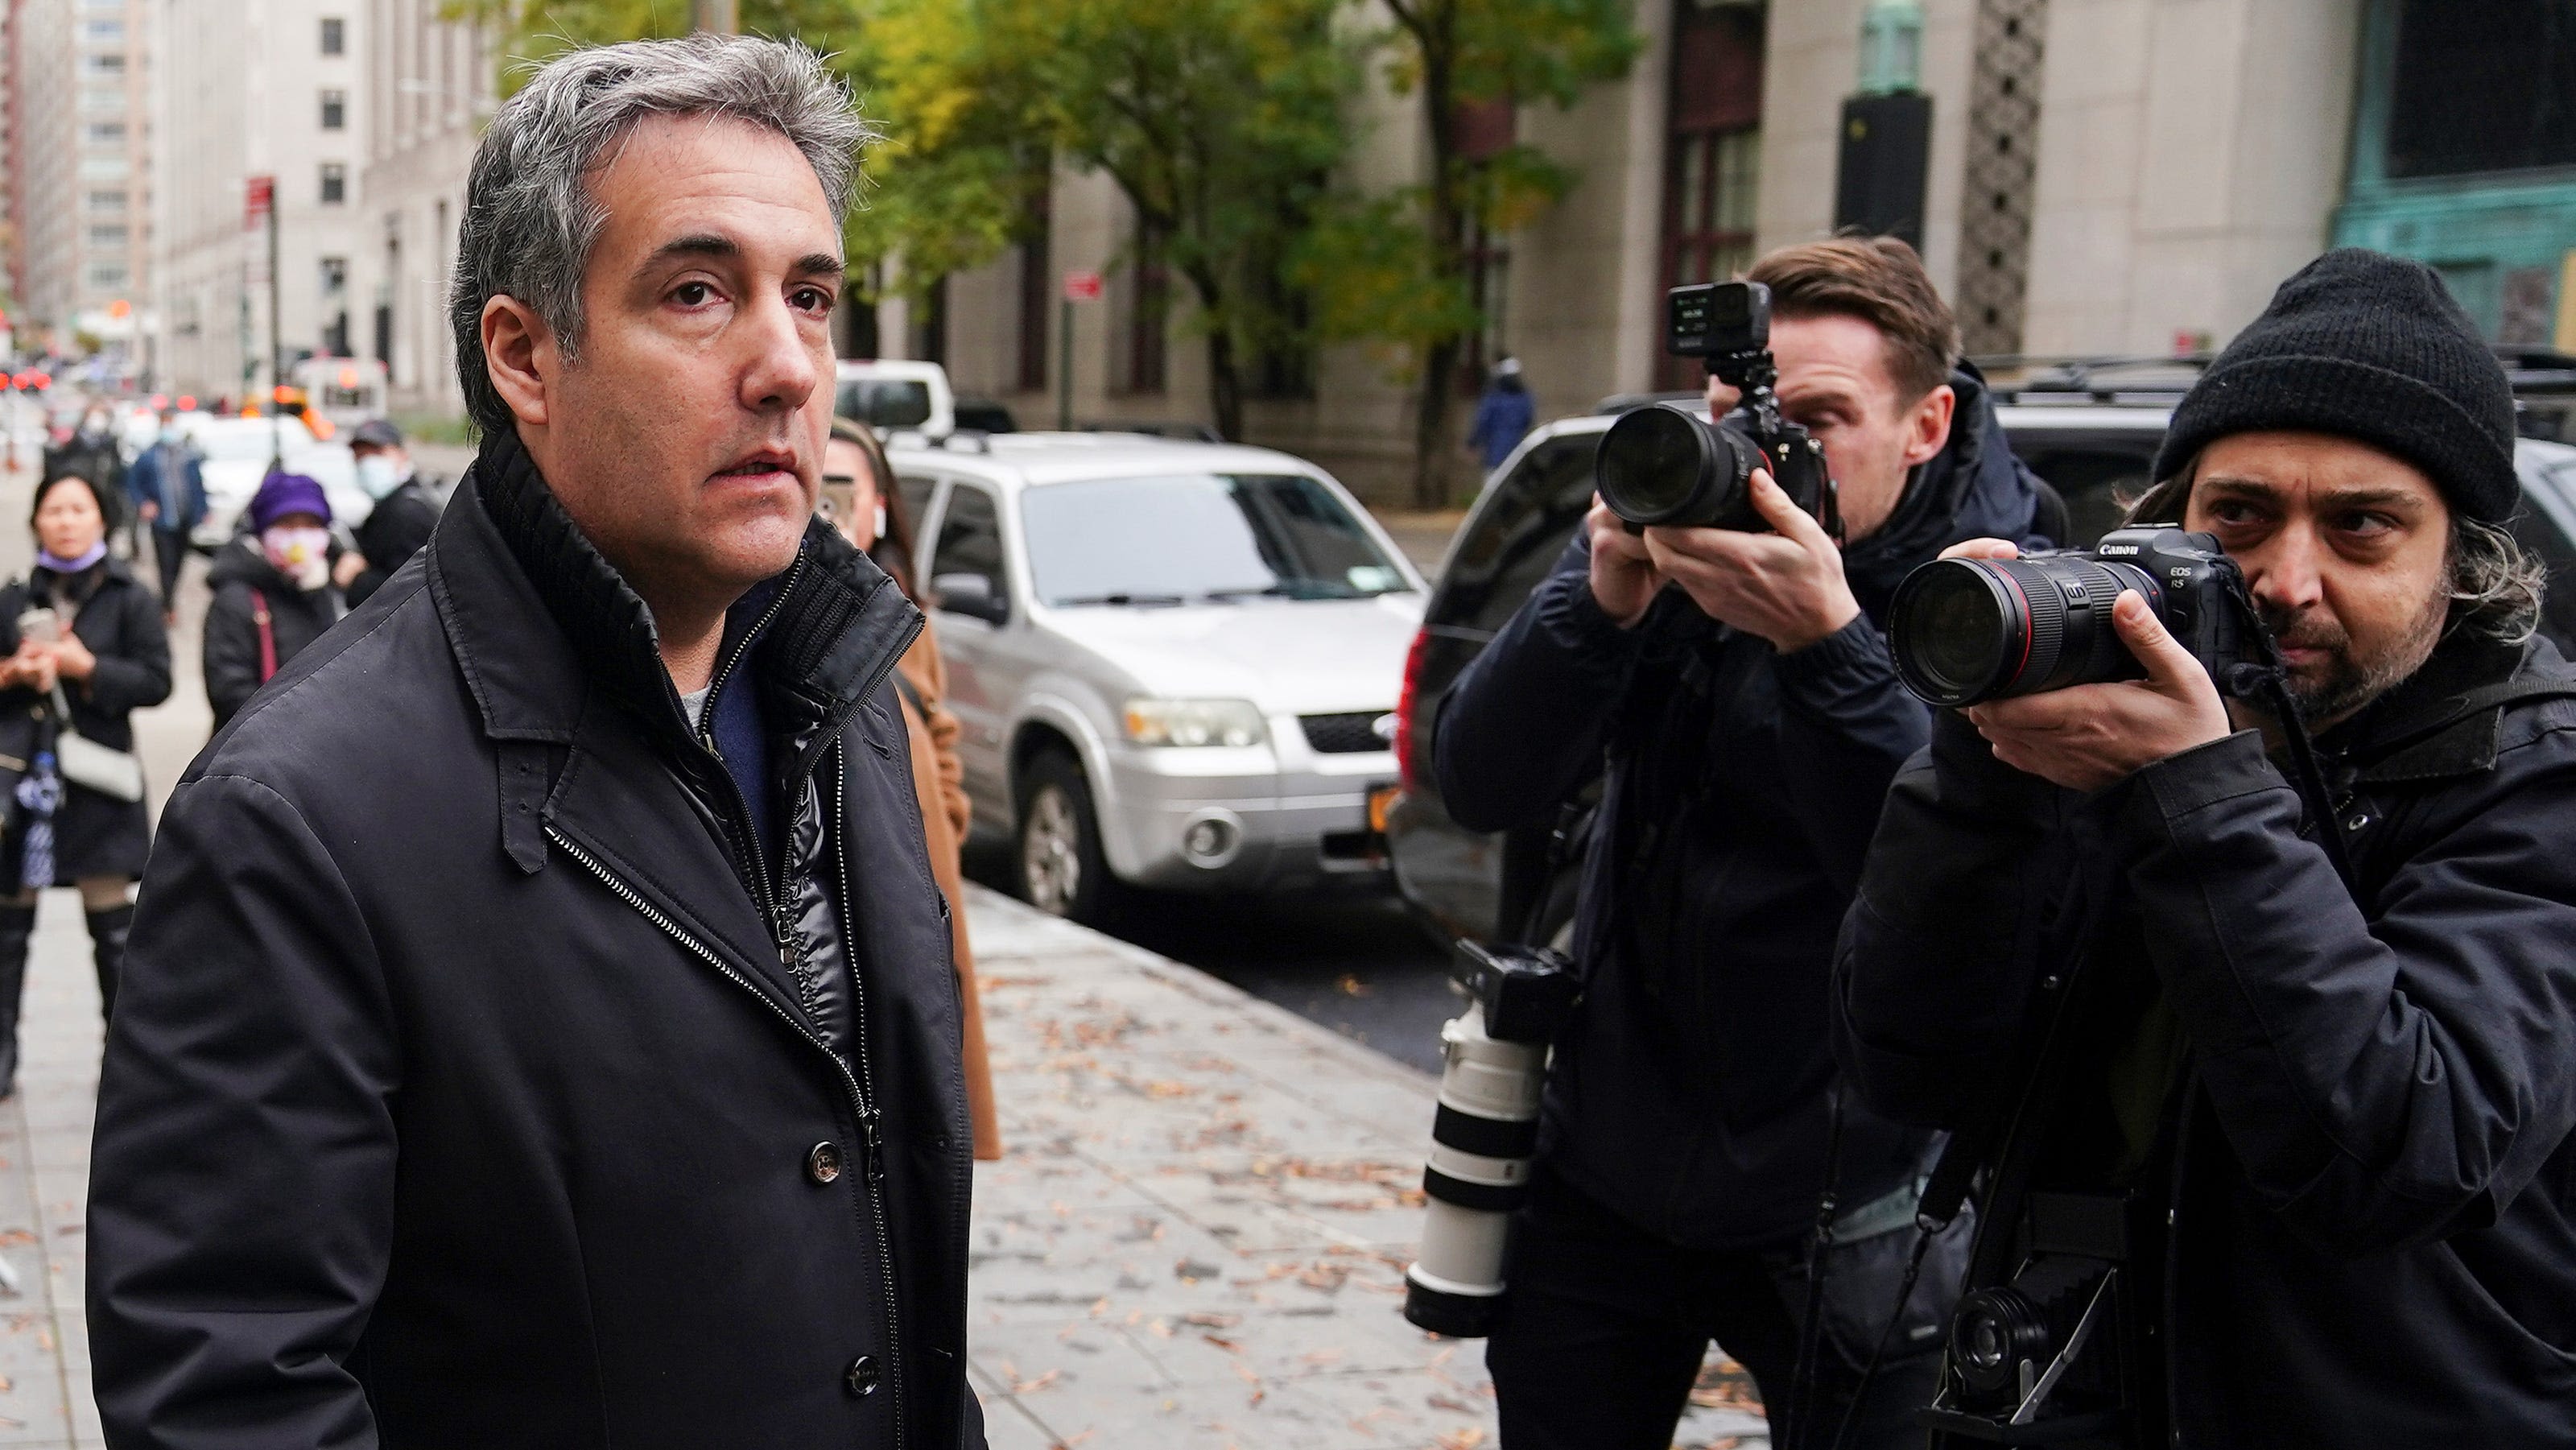 Trump trial live updates: Michael Cohen set to testify as star witness in hush money trial